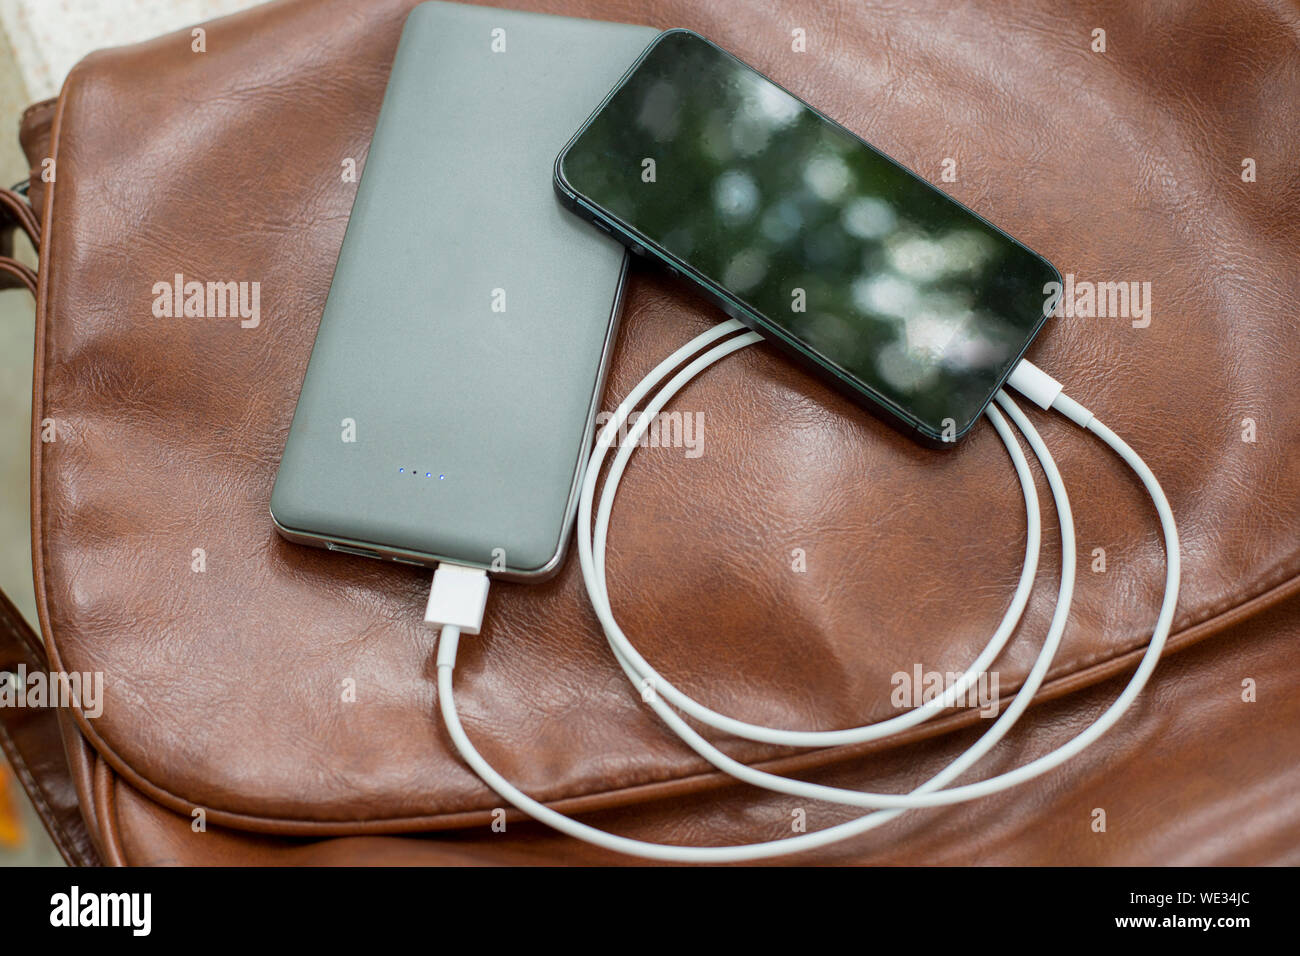 High Angle View Of Mobile With Portable Charger On Brown Leather Bag Stock Photo